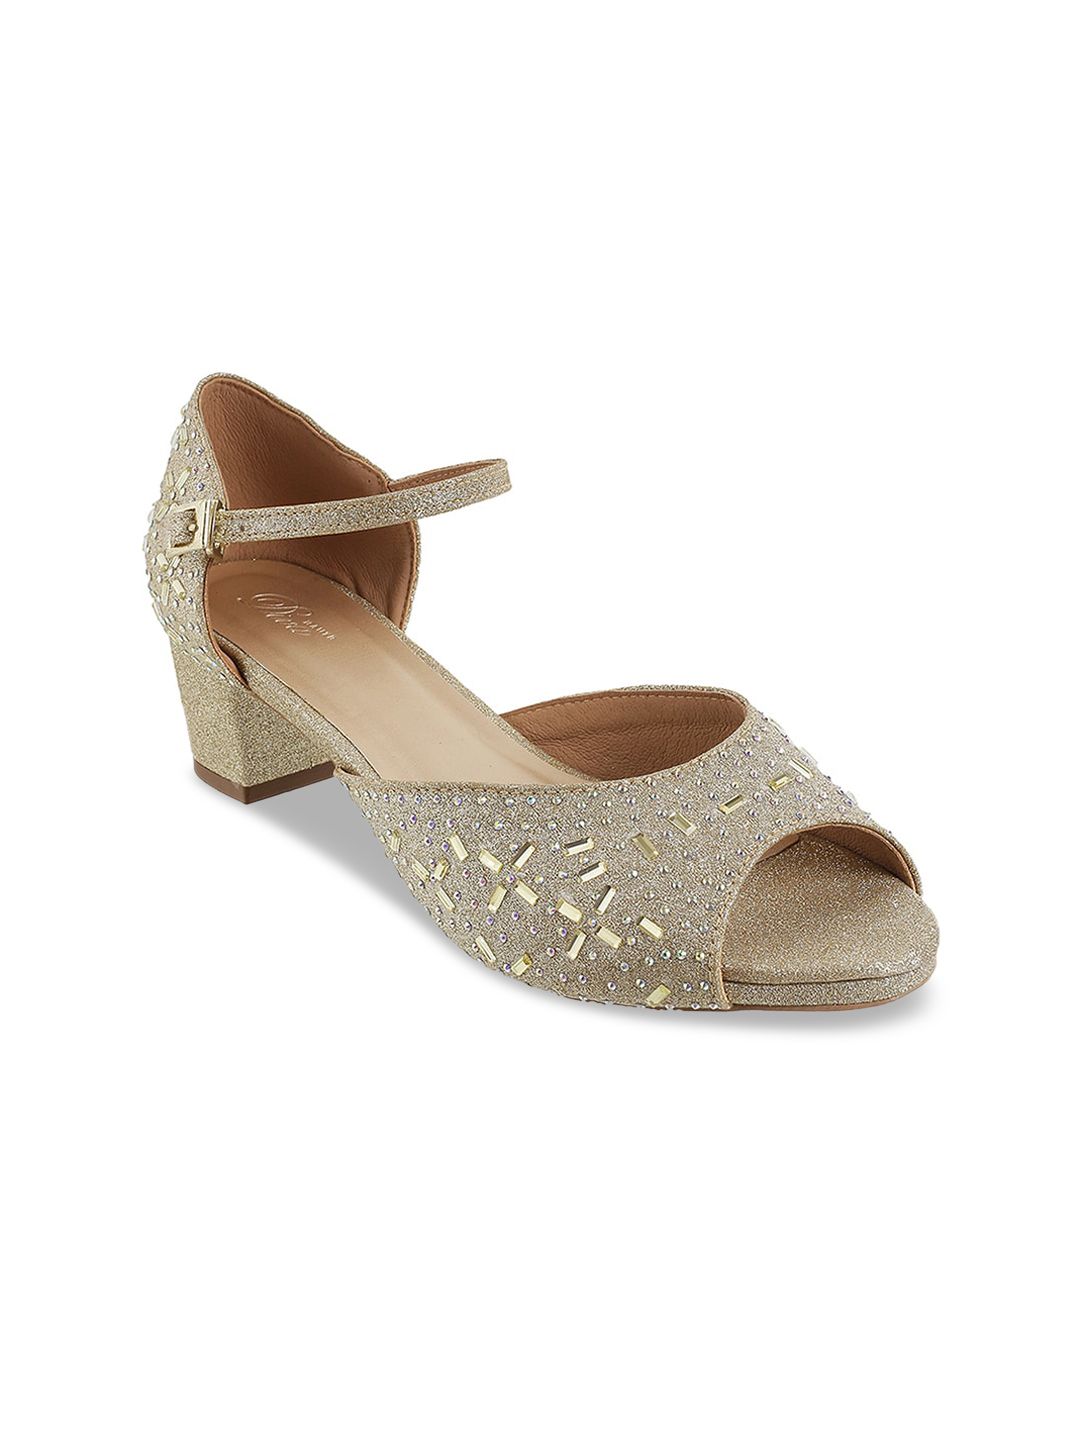 Mochi Gold-Toned & Beige Embellished Block Peep Toes Price in India